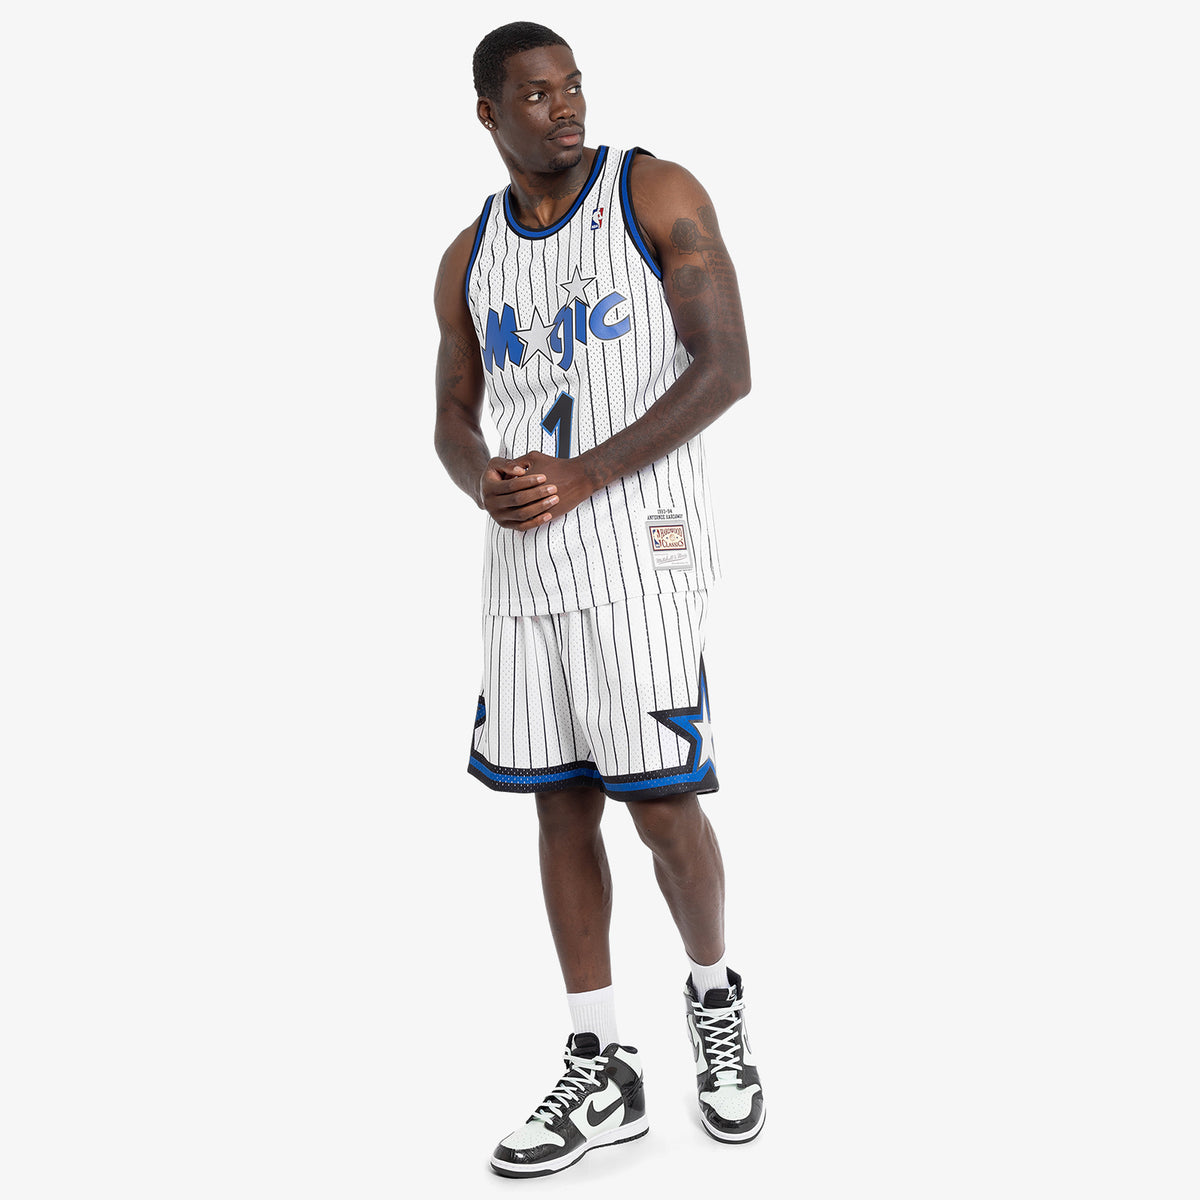 Introducing the Authentic Penny Hardaway '98 Magic Home Jersey The